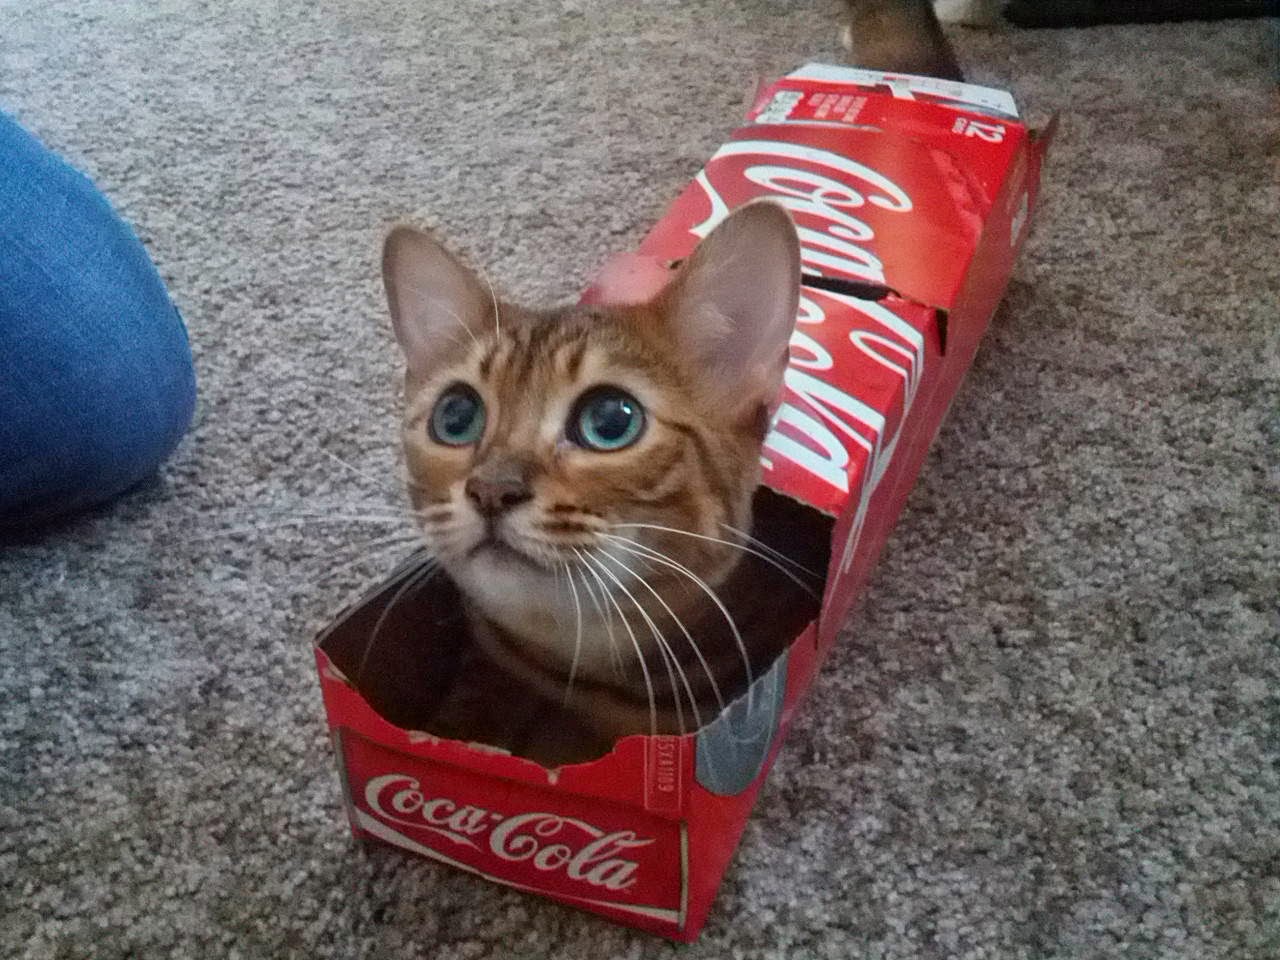 Funny cats - part 96 (40 pics + 10 gifs), cat pictures, cat playing in soft drink box